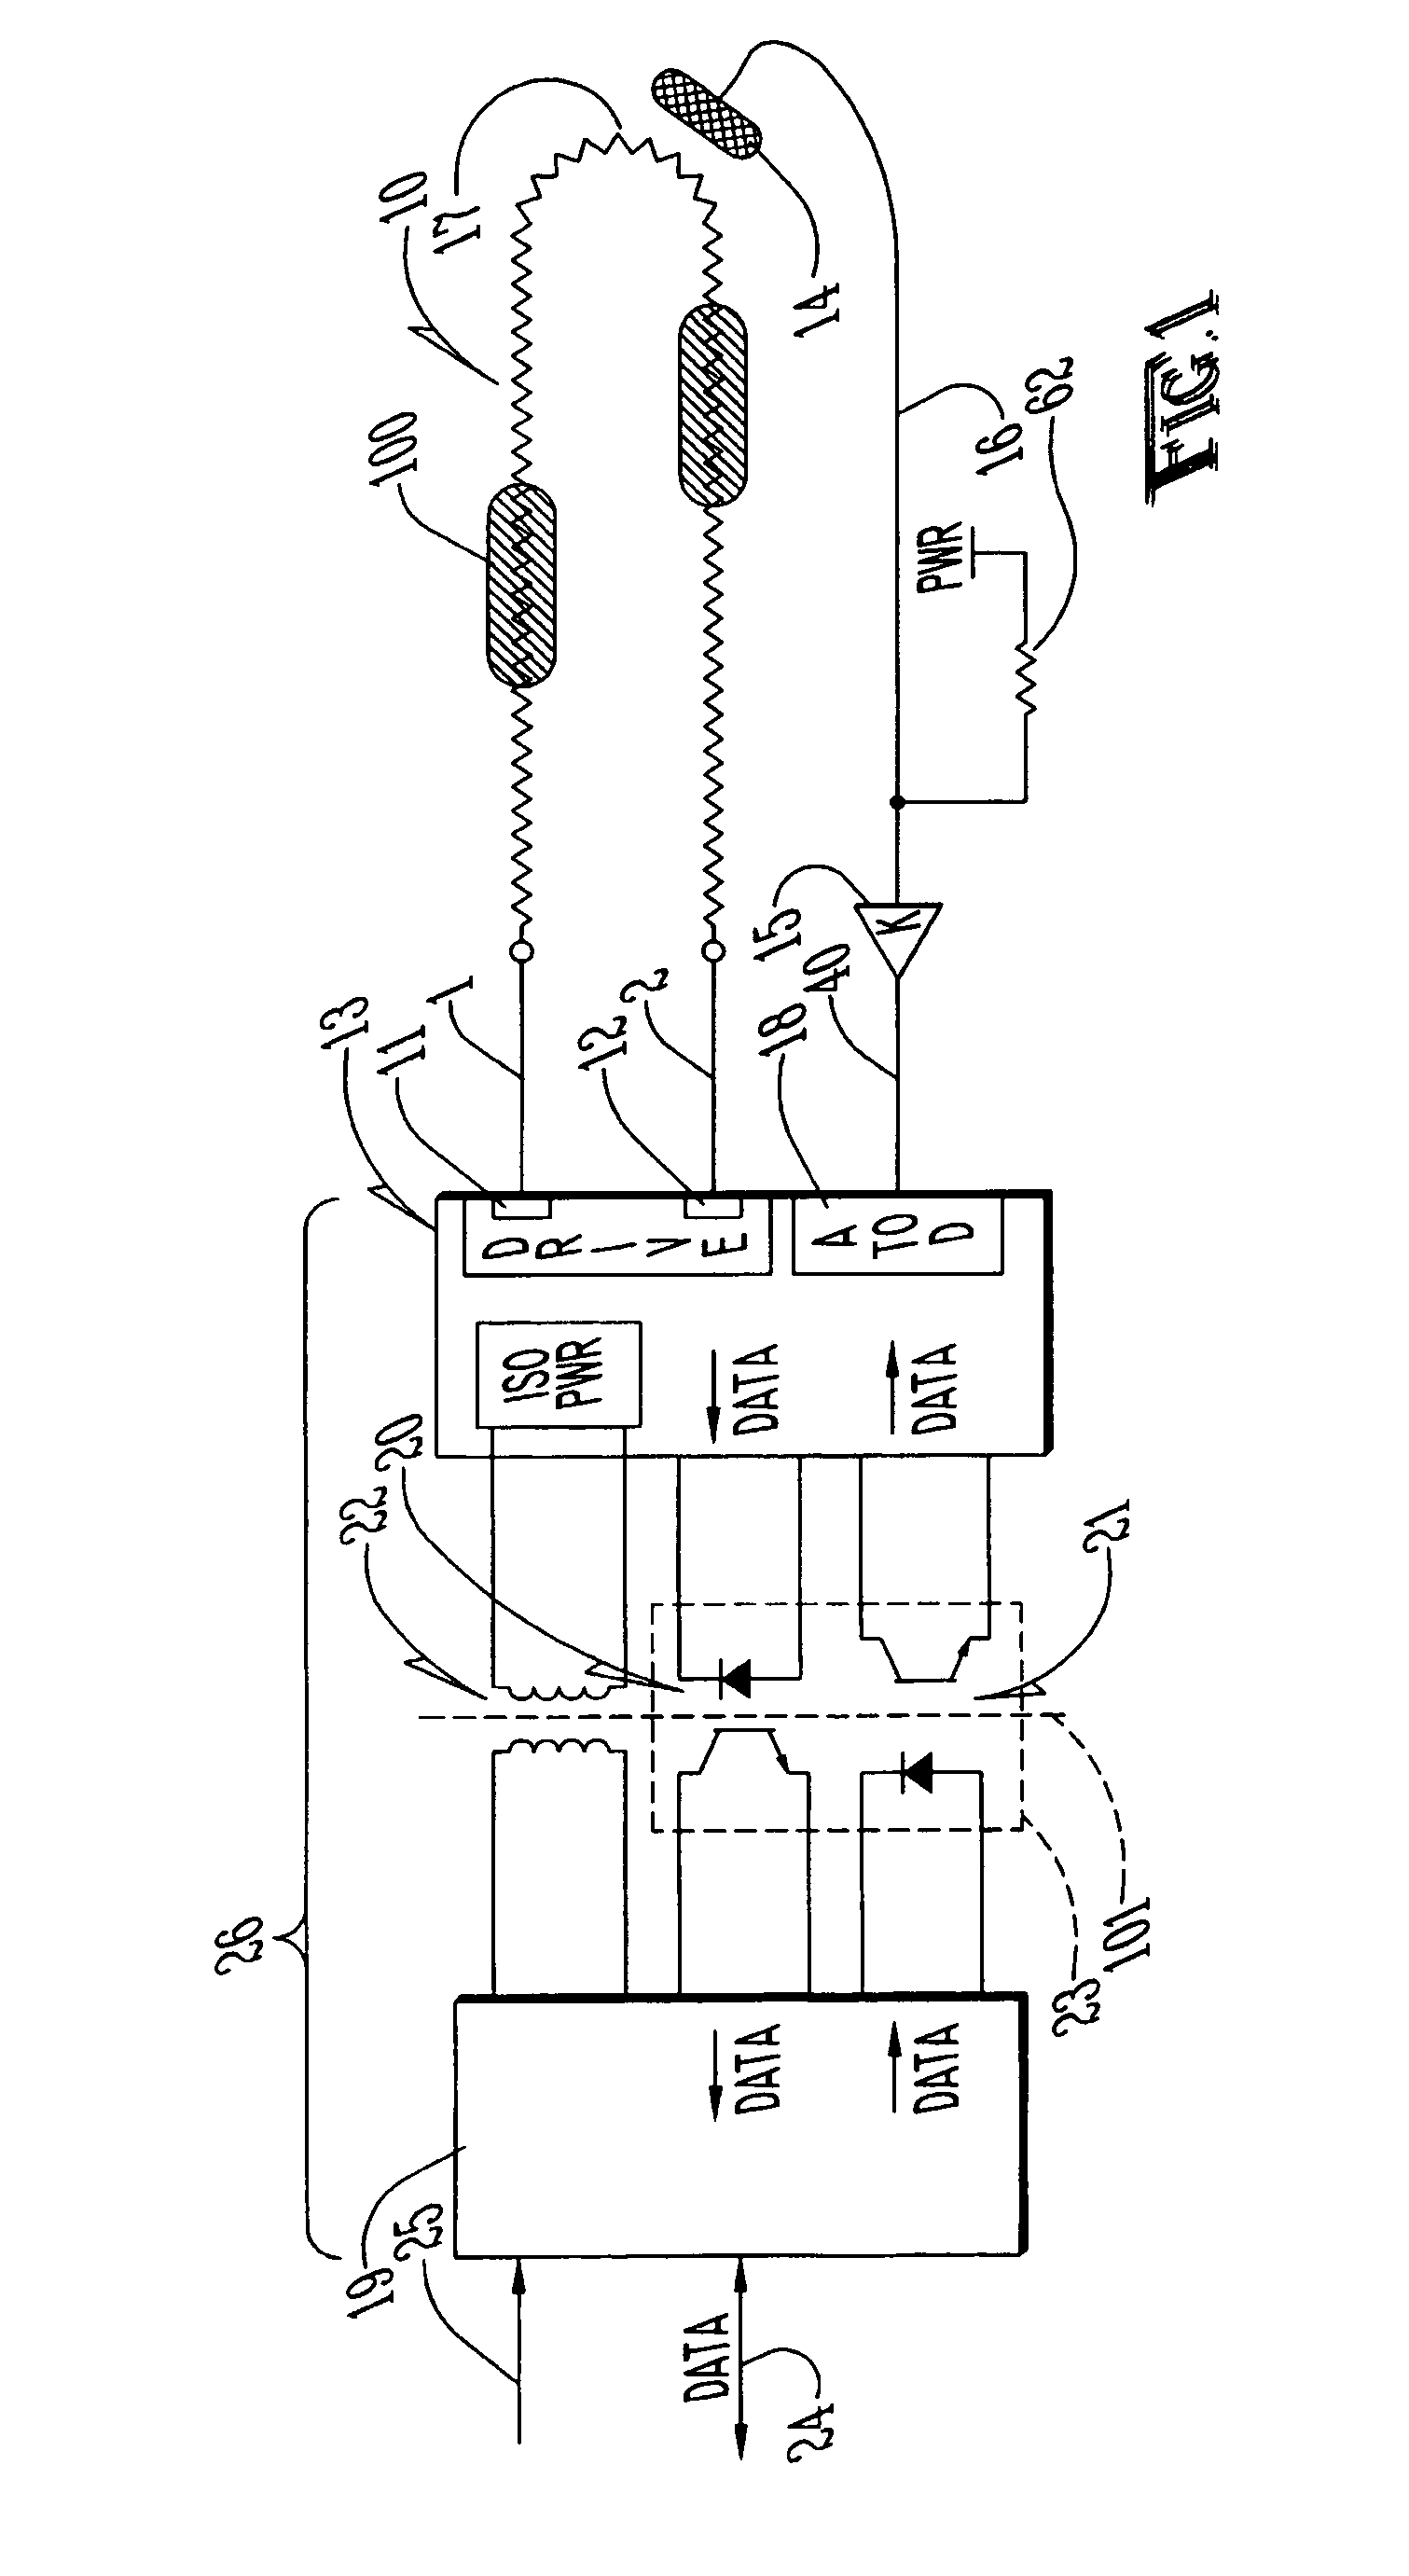 Resistive loop excitation and readout for touch point detection and generation of corresponding control signals